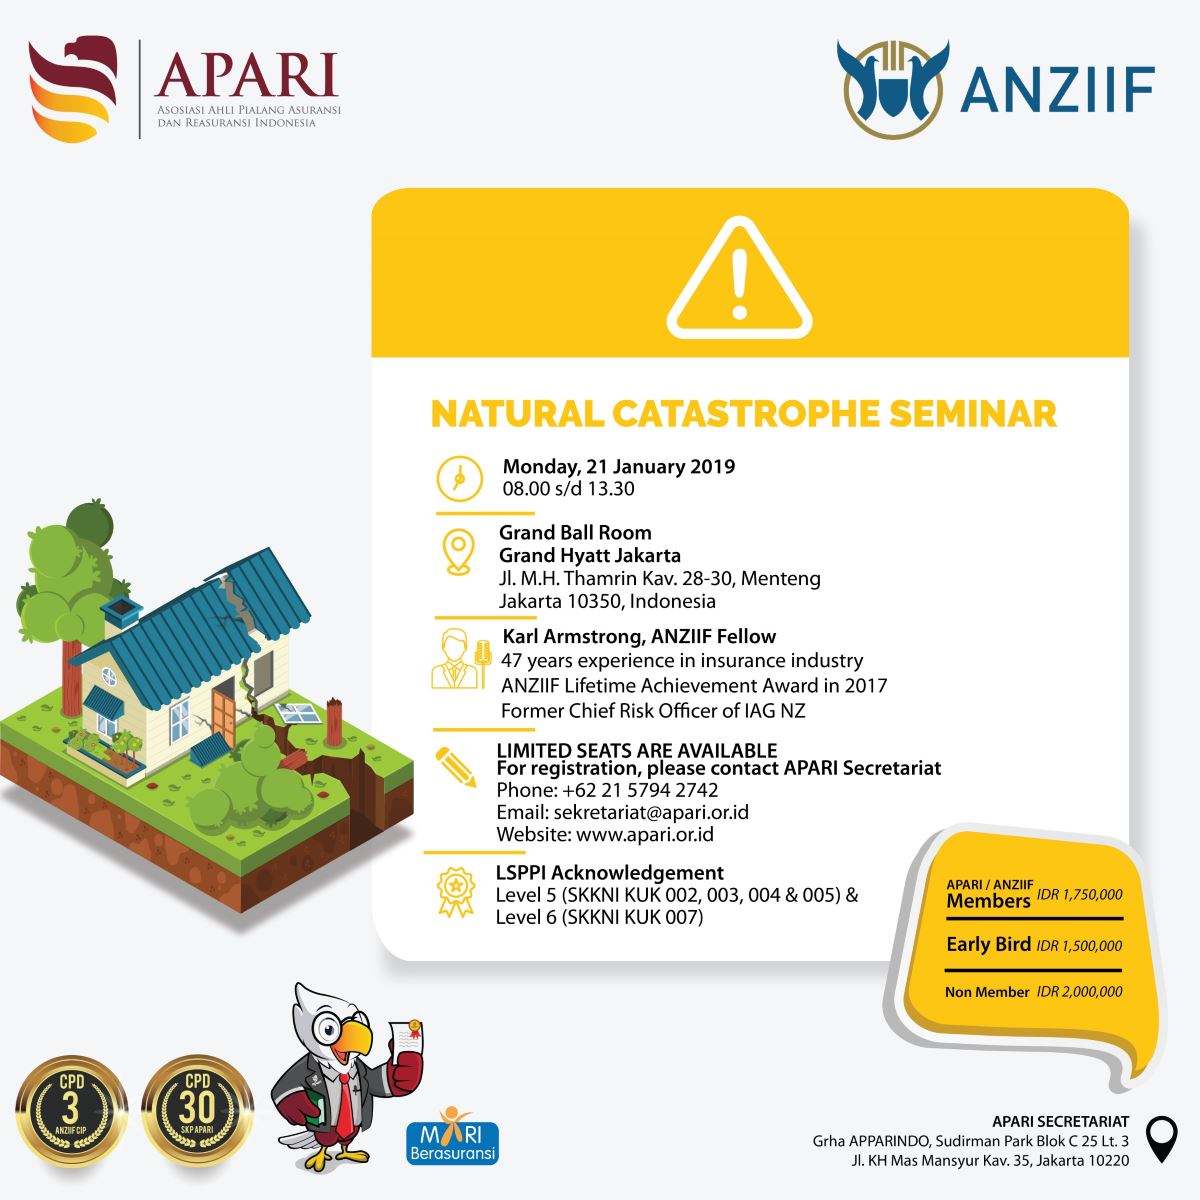 Flyer APARI - Natural Catastrophe Seminar Image of APARI Natural Catastrophe Seminar flyer showcasing visually captivating design and informative content. Graphic design flyer for the Natural Catastrophe Seminar featuring underwriting perspectives and risk assessment